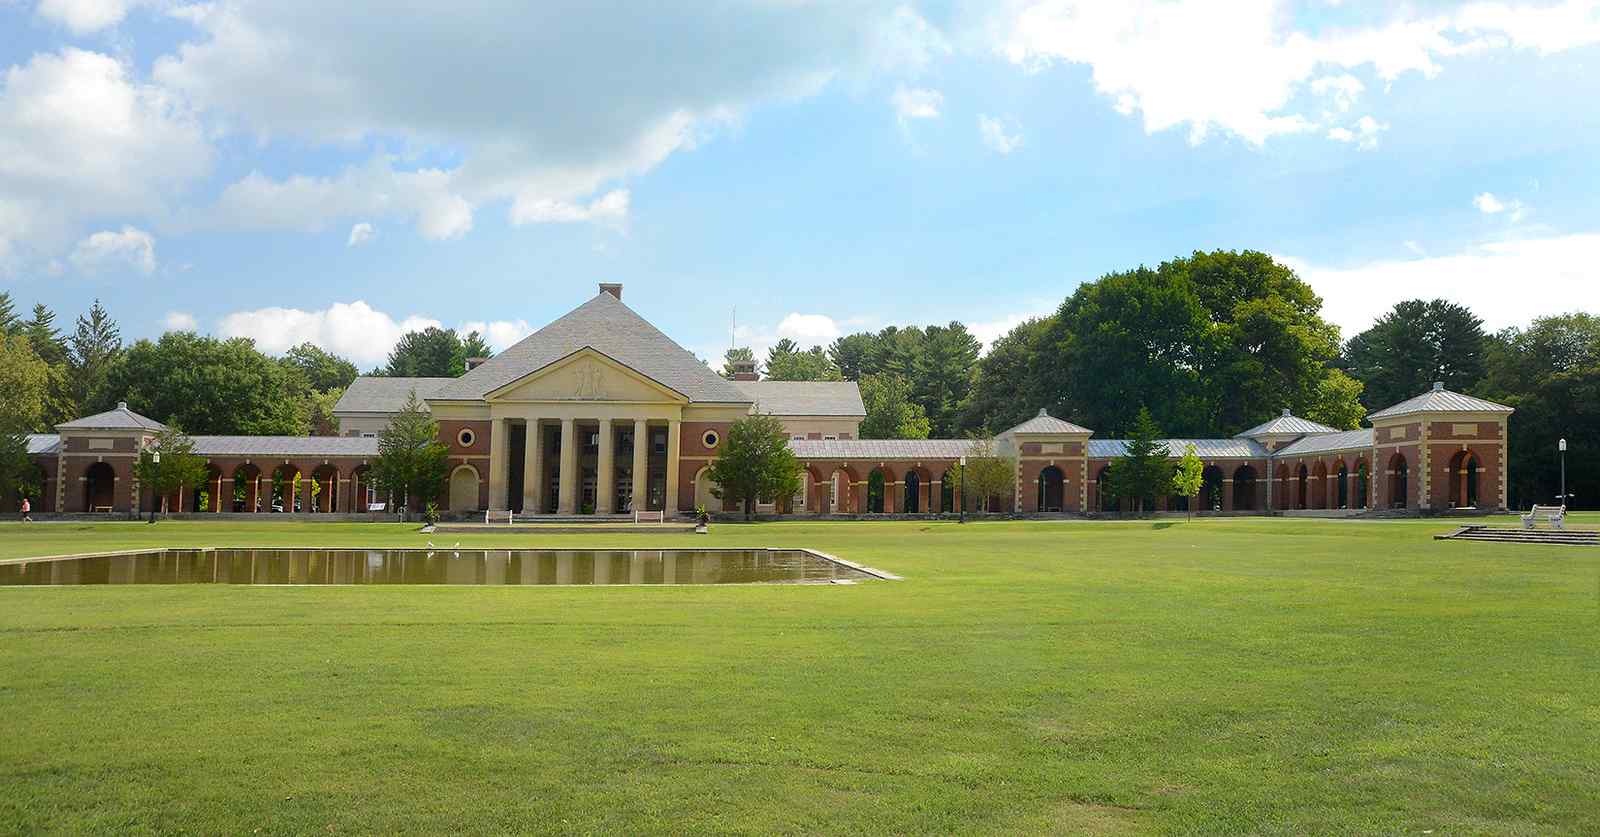 view of a large building in saratoga spa state park